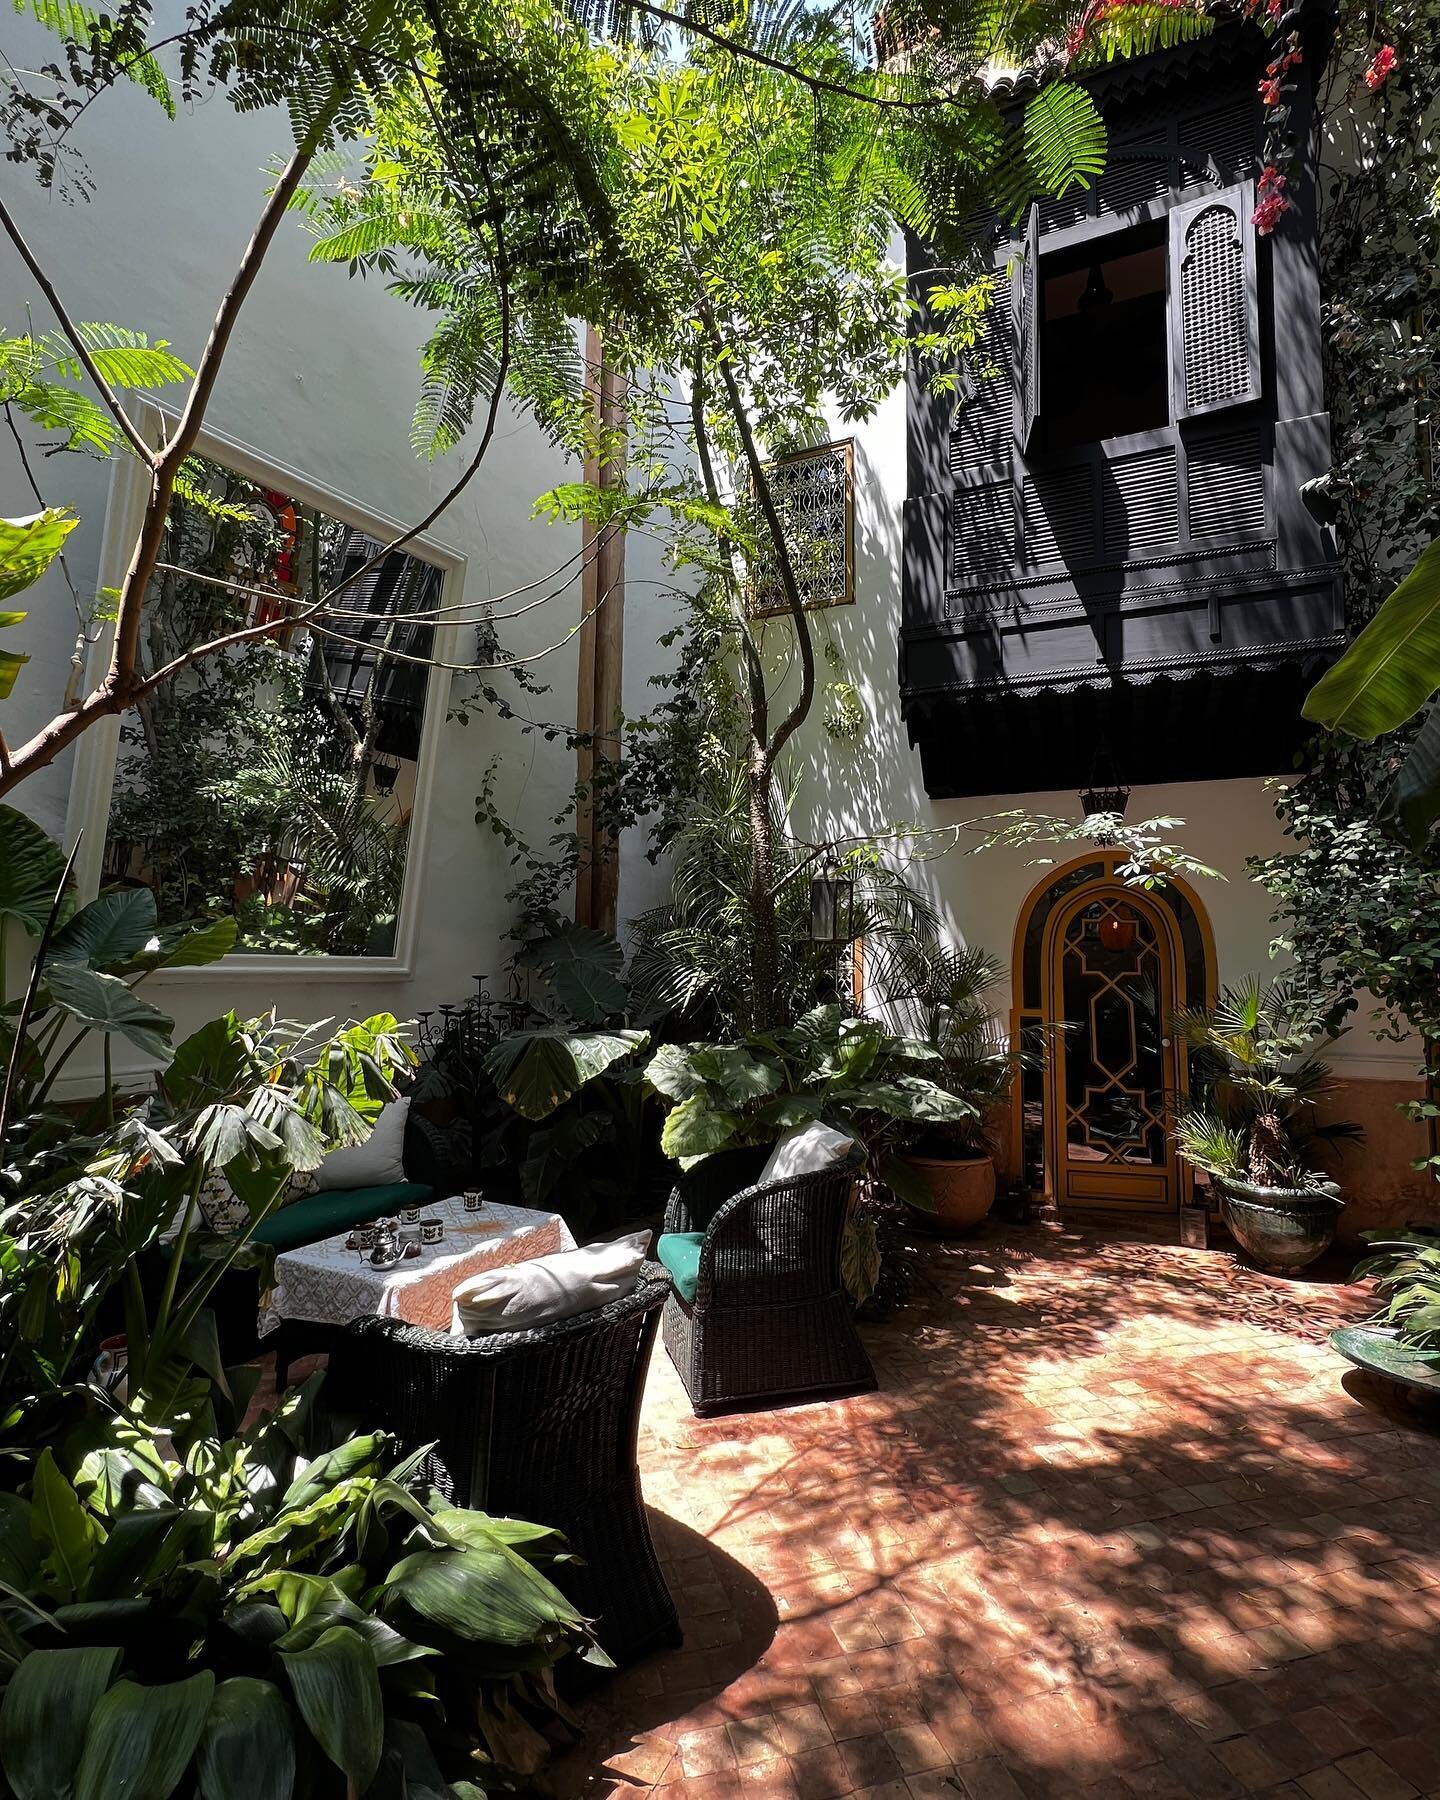 Gorgeous riad in the middle of the Medina @riadjeannoel